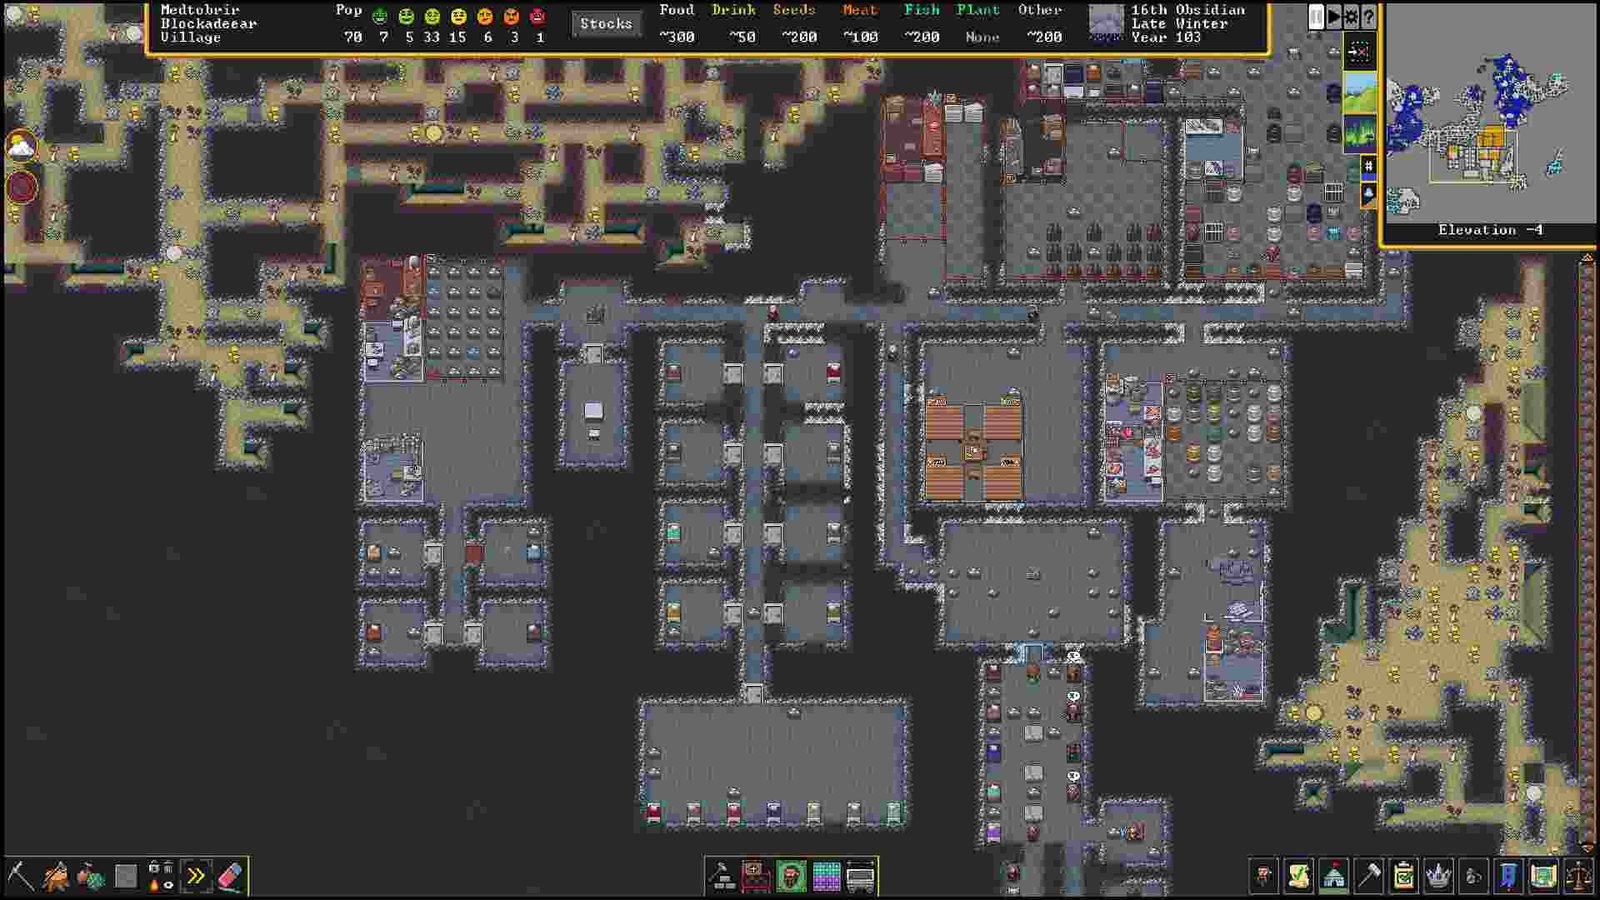 Dwarf Fortress Multiplayer Mode Release Date: When is it coming out?